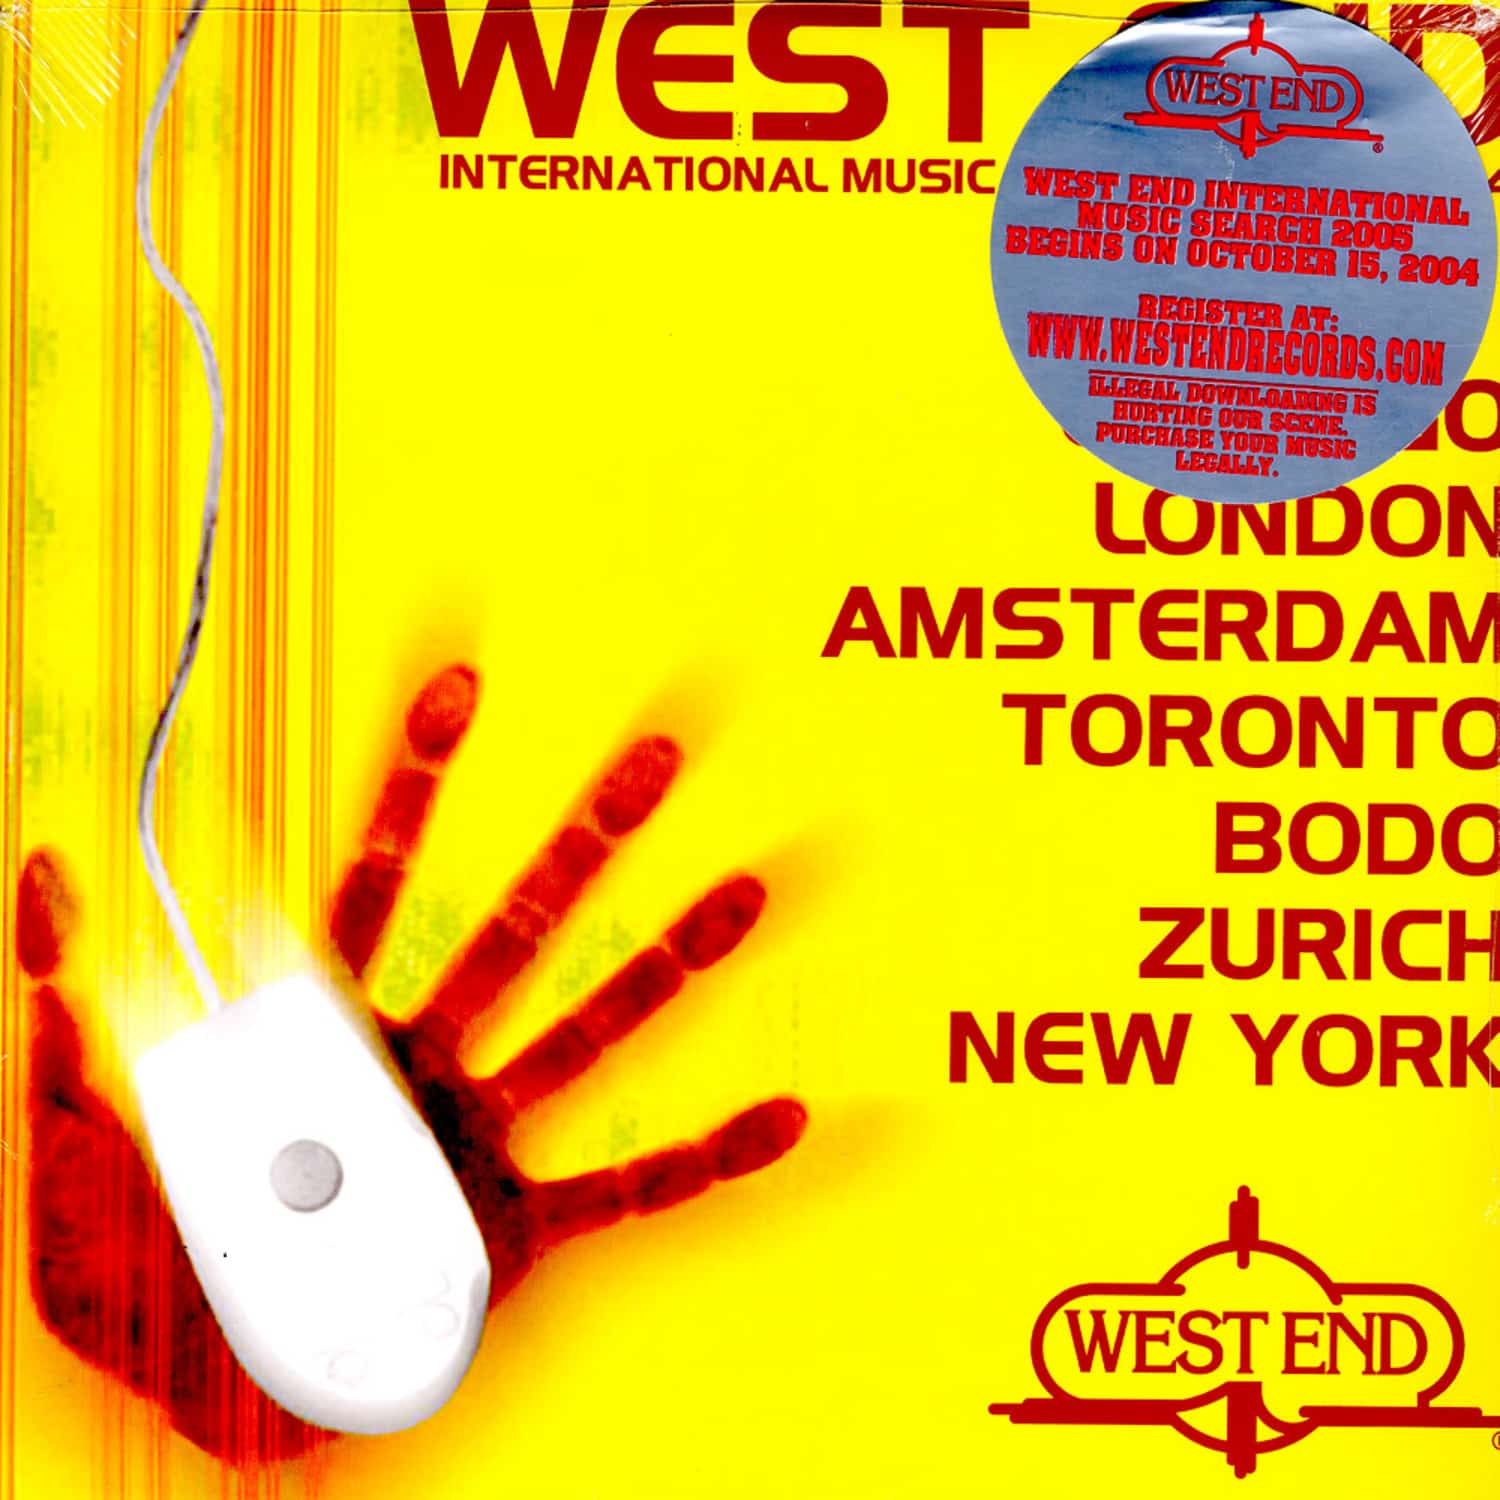 V/A - WEST END INTERNATIONAL MUSIC SEARCH 2003 - 2004 